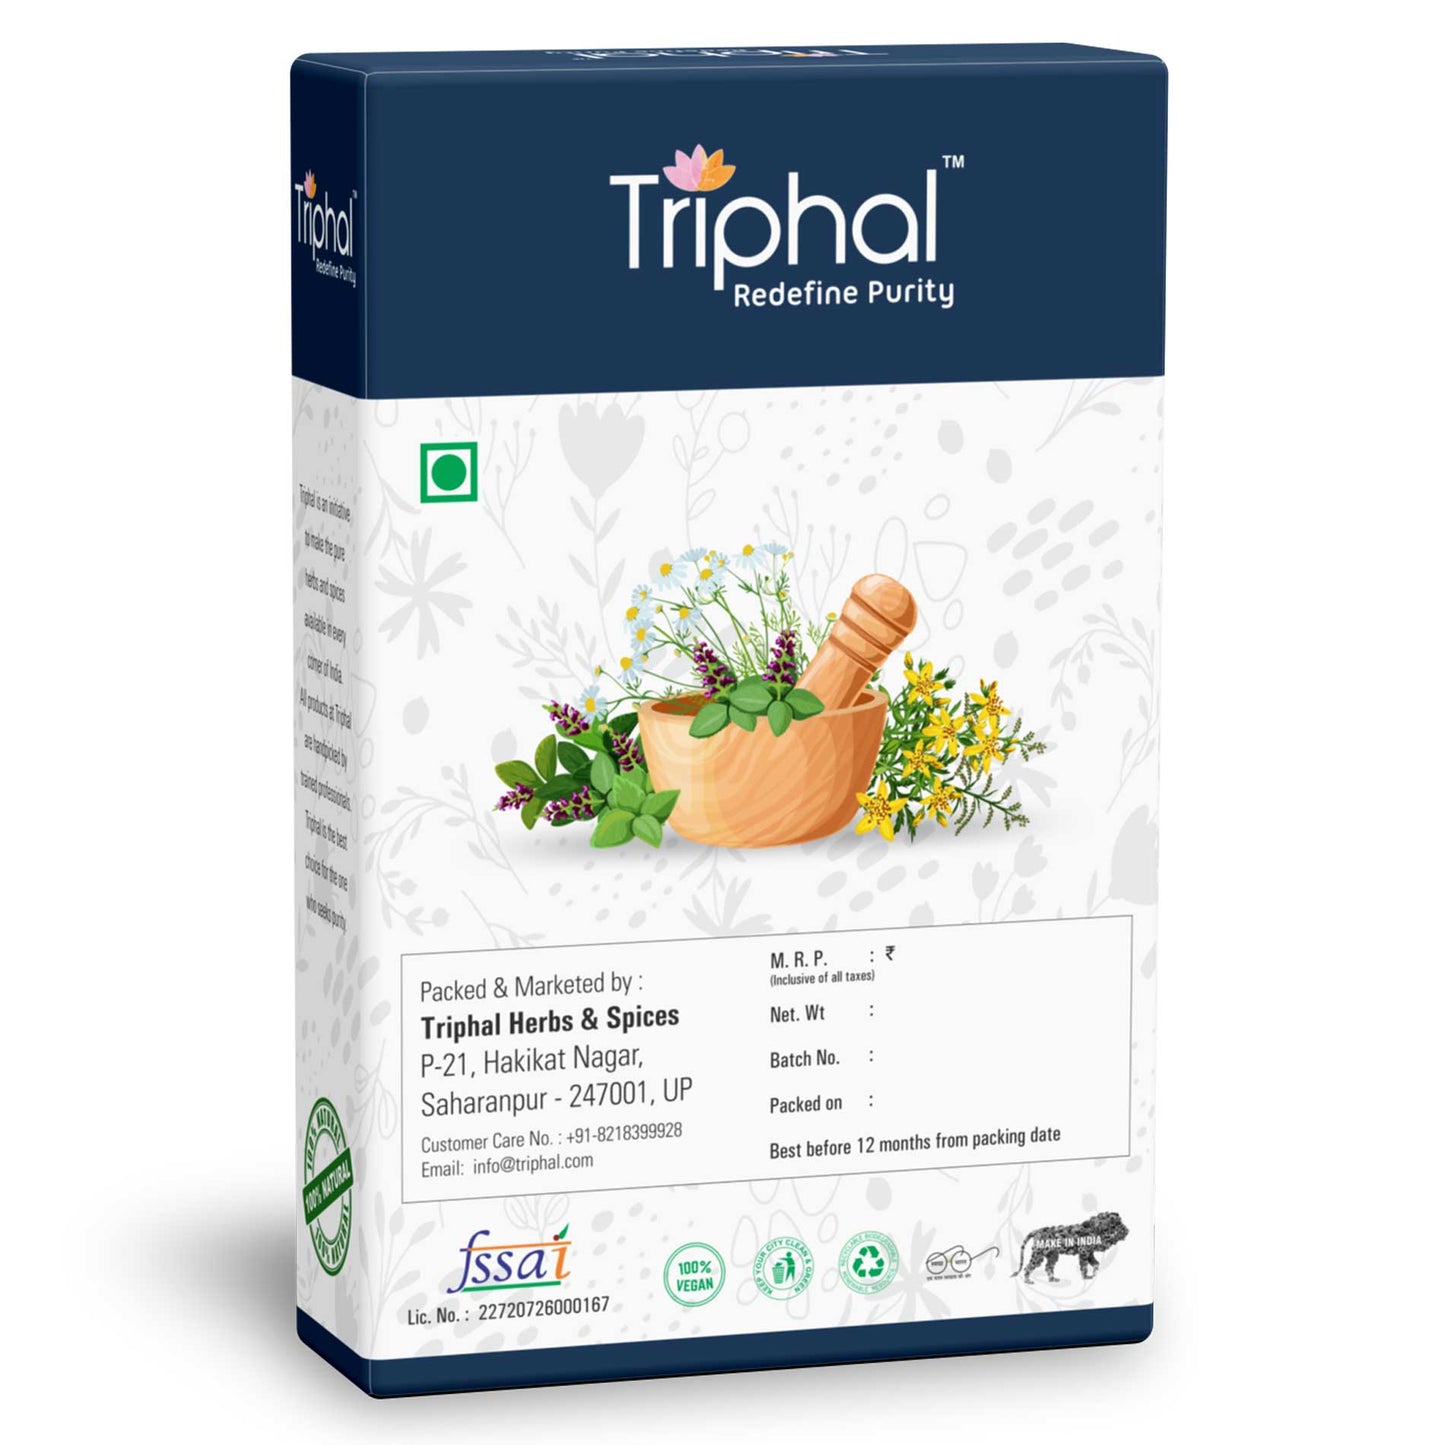 5 in 1 Trail Mix - contains almonds, pumpkin seeds, sunflower seeds, chia seeds, flax seeds by Triphal